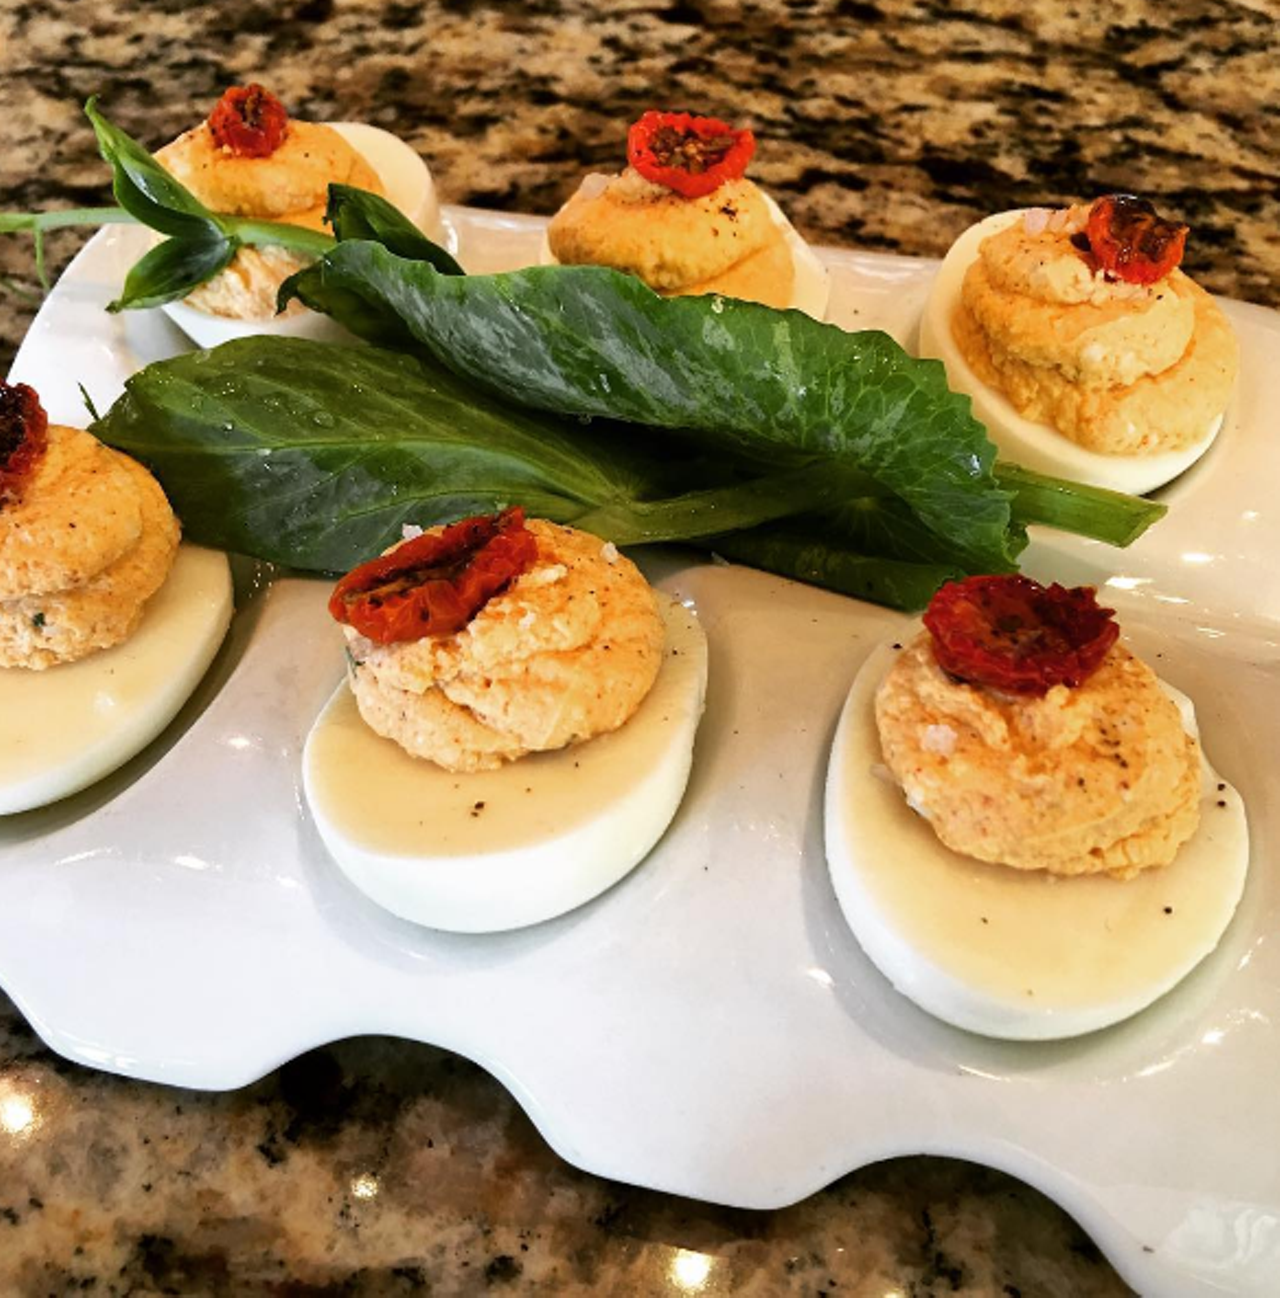 Lake Meadows &#147;Red Devil&#148; stuffed eggs from The Rusty Spoon
55 W. Church St., 407-401-8811
These protein bombs will sate hanger with Tabasco (hence the Red Devil part of the name), pickles, fresh herbs and oven-dried tomatoes mixed into the filling.
Photo via tomsartori/Instagram